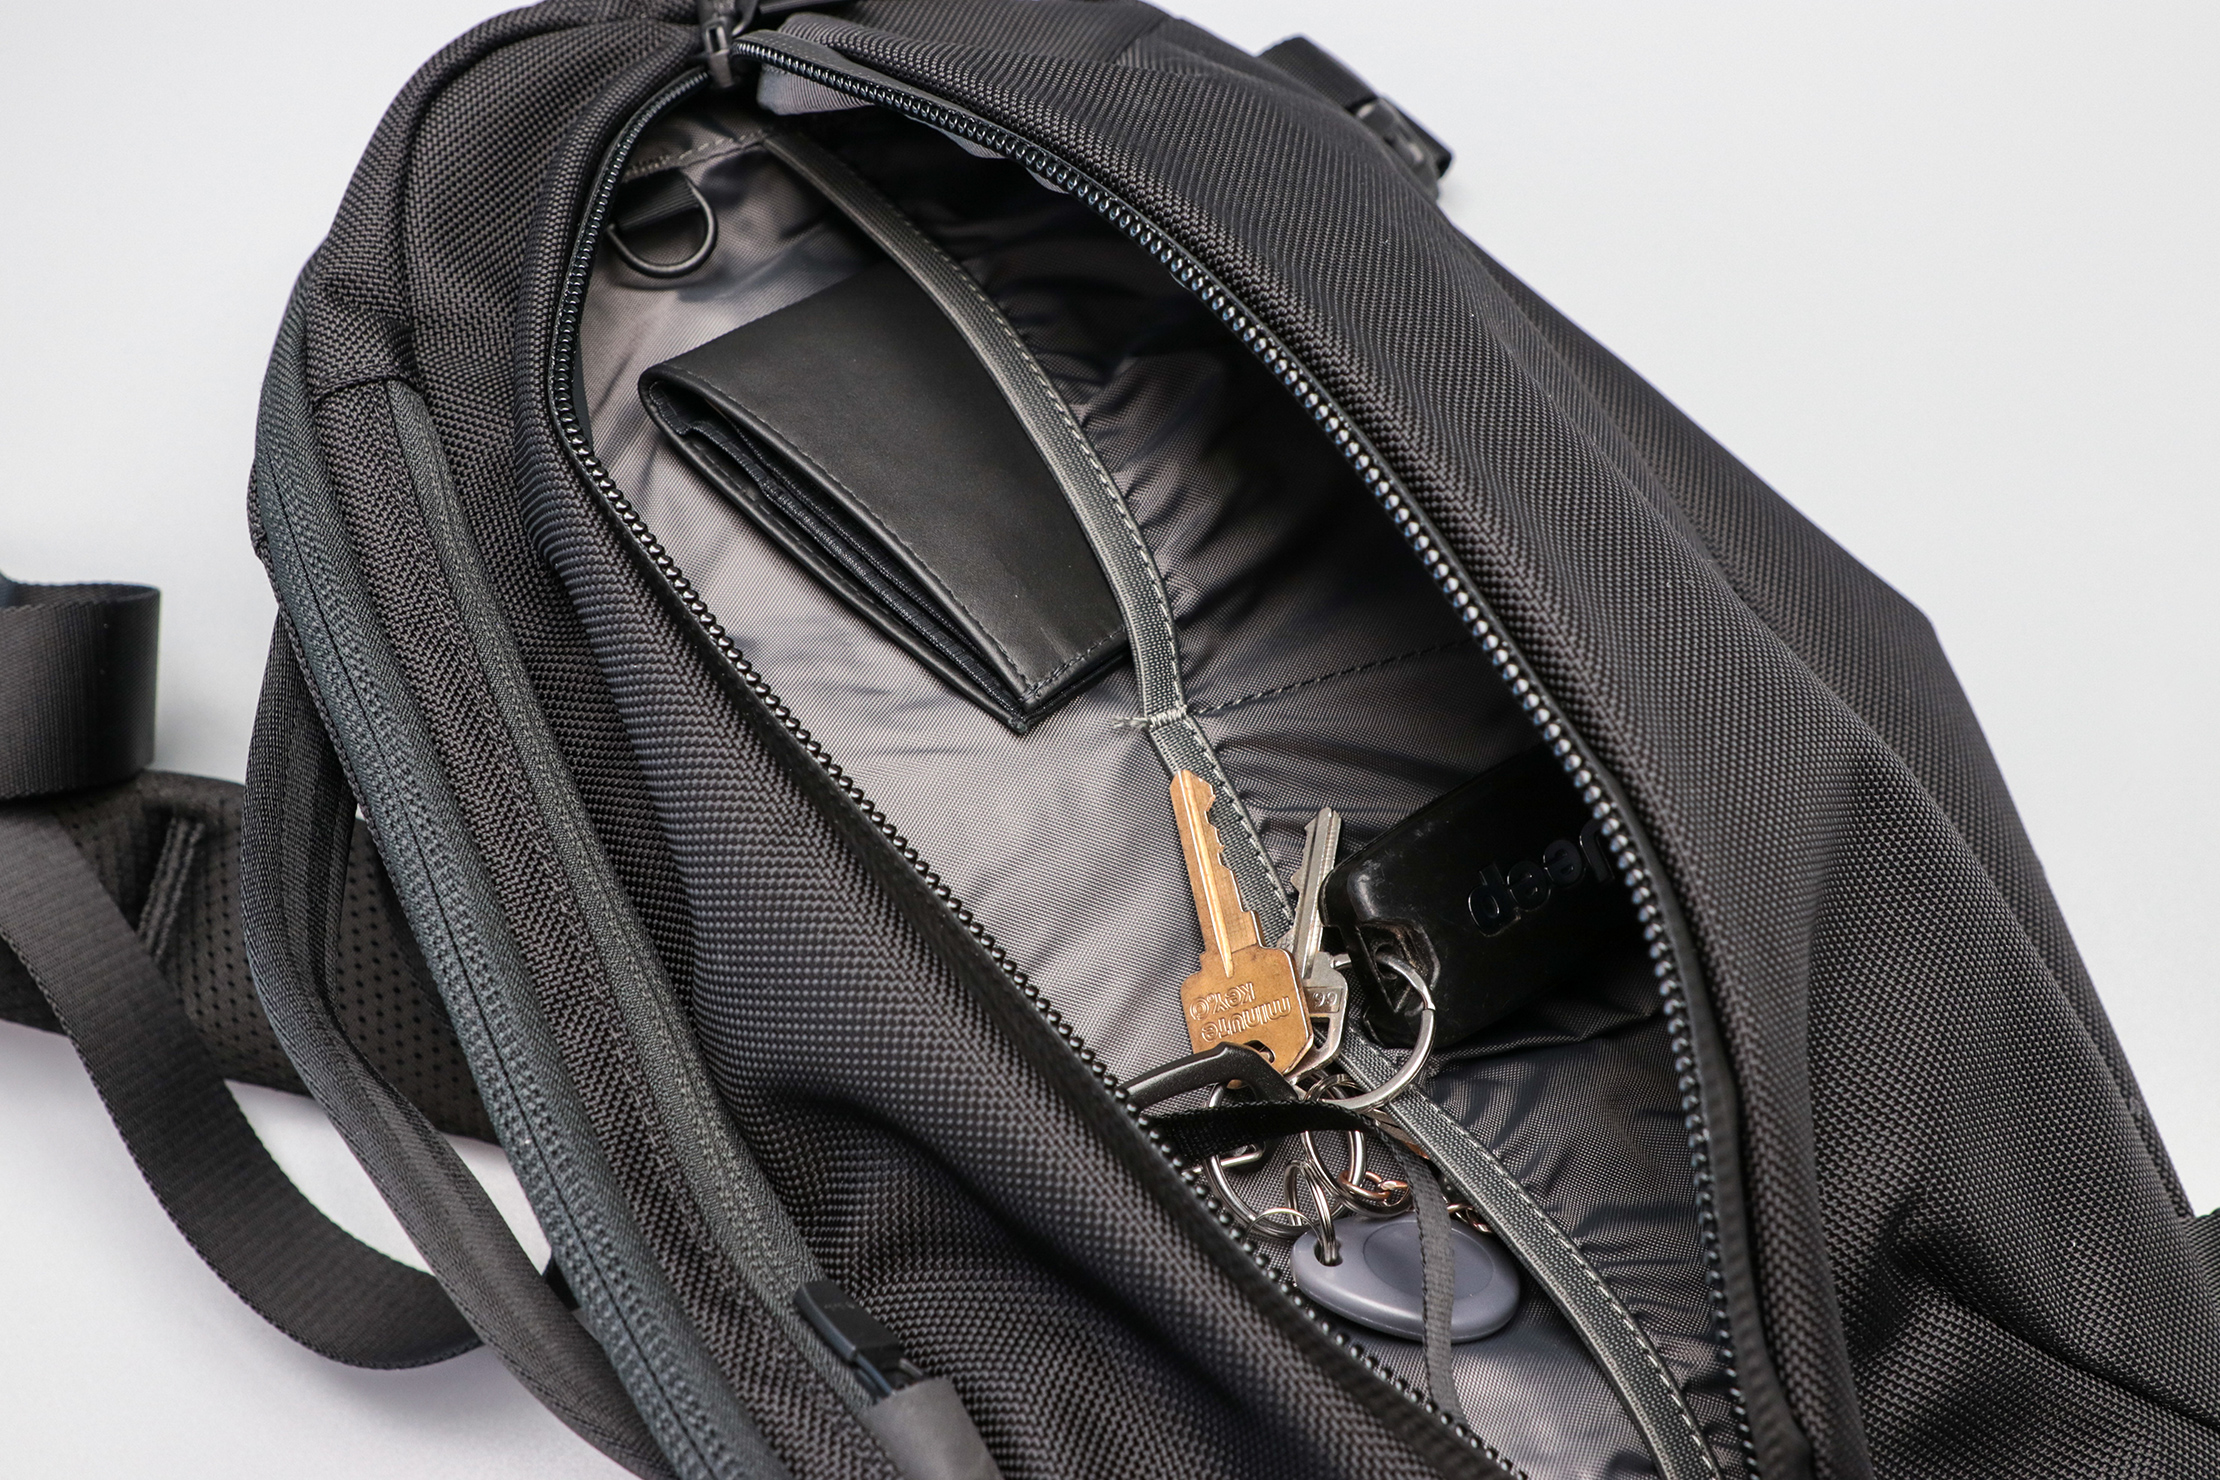 Aer Travel Sling 2 Review